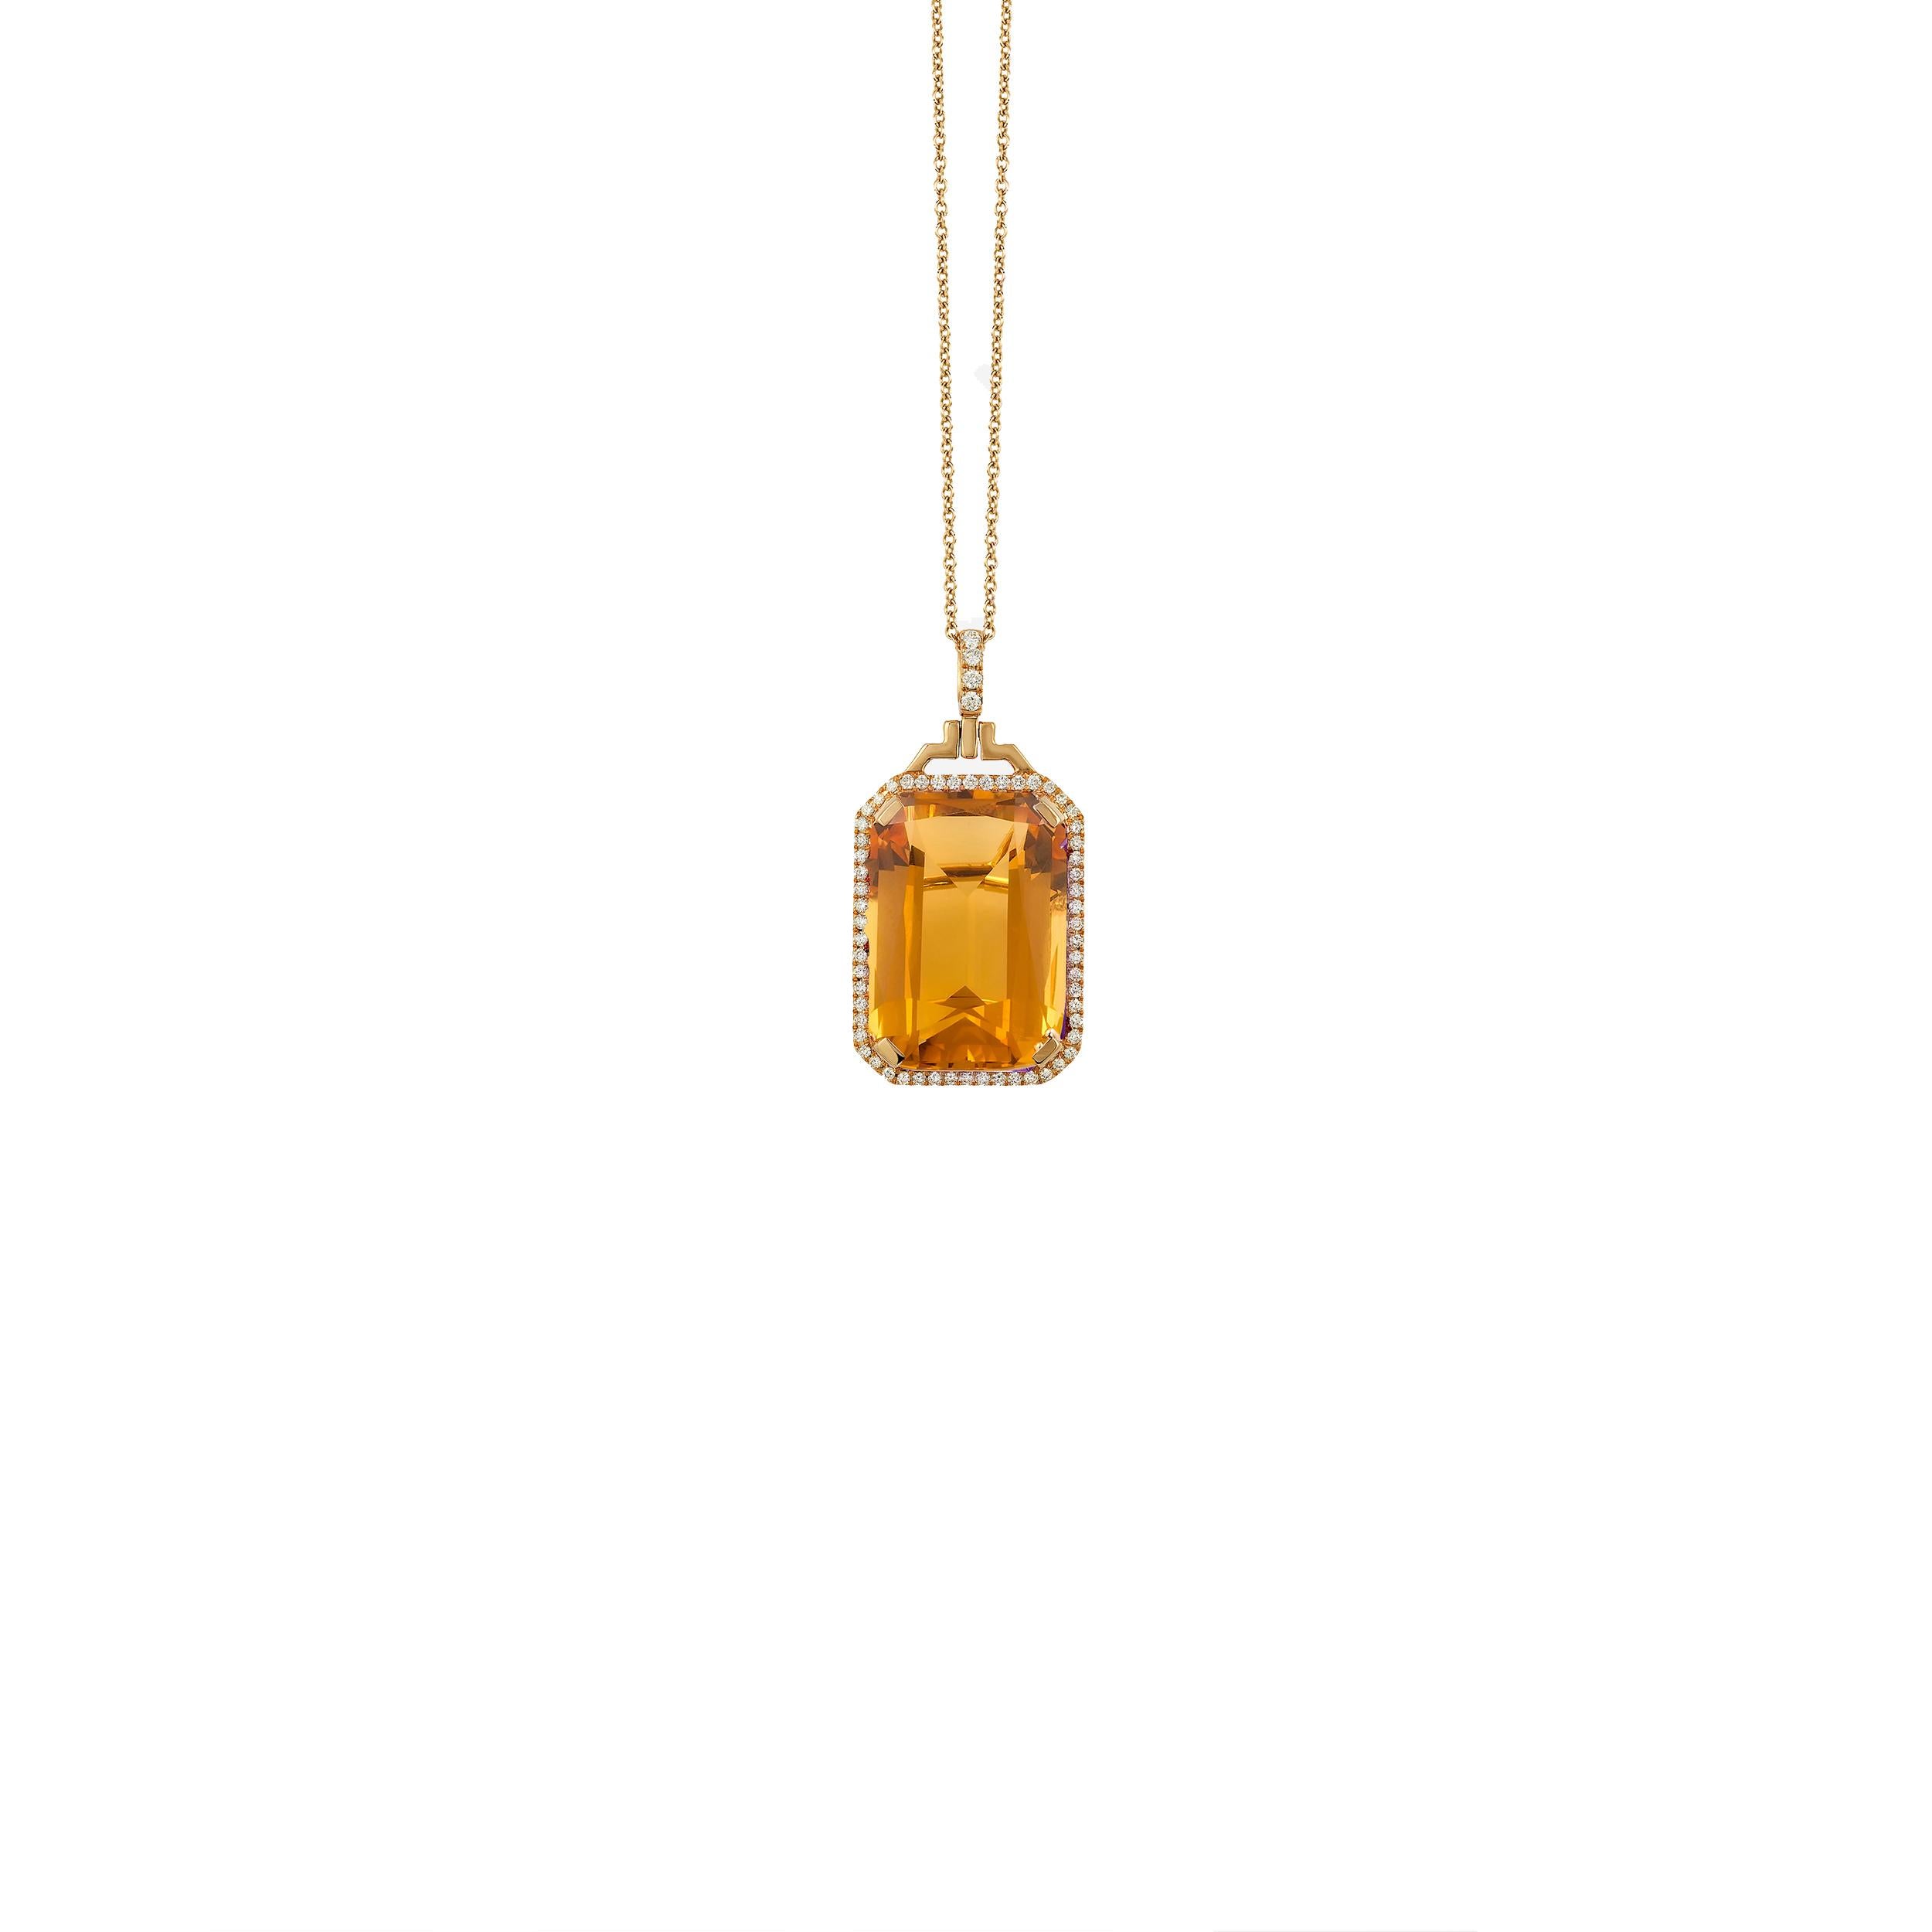 Citrine Emerald Cut Pendant with Diamonds in 18K Pink Gold, from 'Gossip' Collection 
 
 on a 18'' Chain
 
 Stone Size: 10 x 15 mm 
 
 Gemstone Approx Wt: Citrine- 6.25 Carats 
 
 Diamonds: G-H / VS, Approx Wt : 0.15 Carats